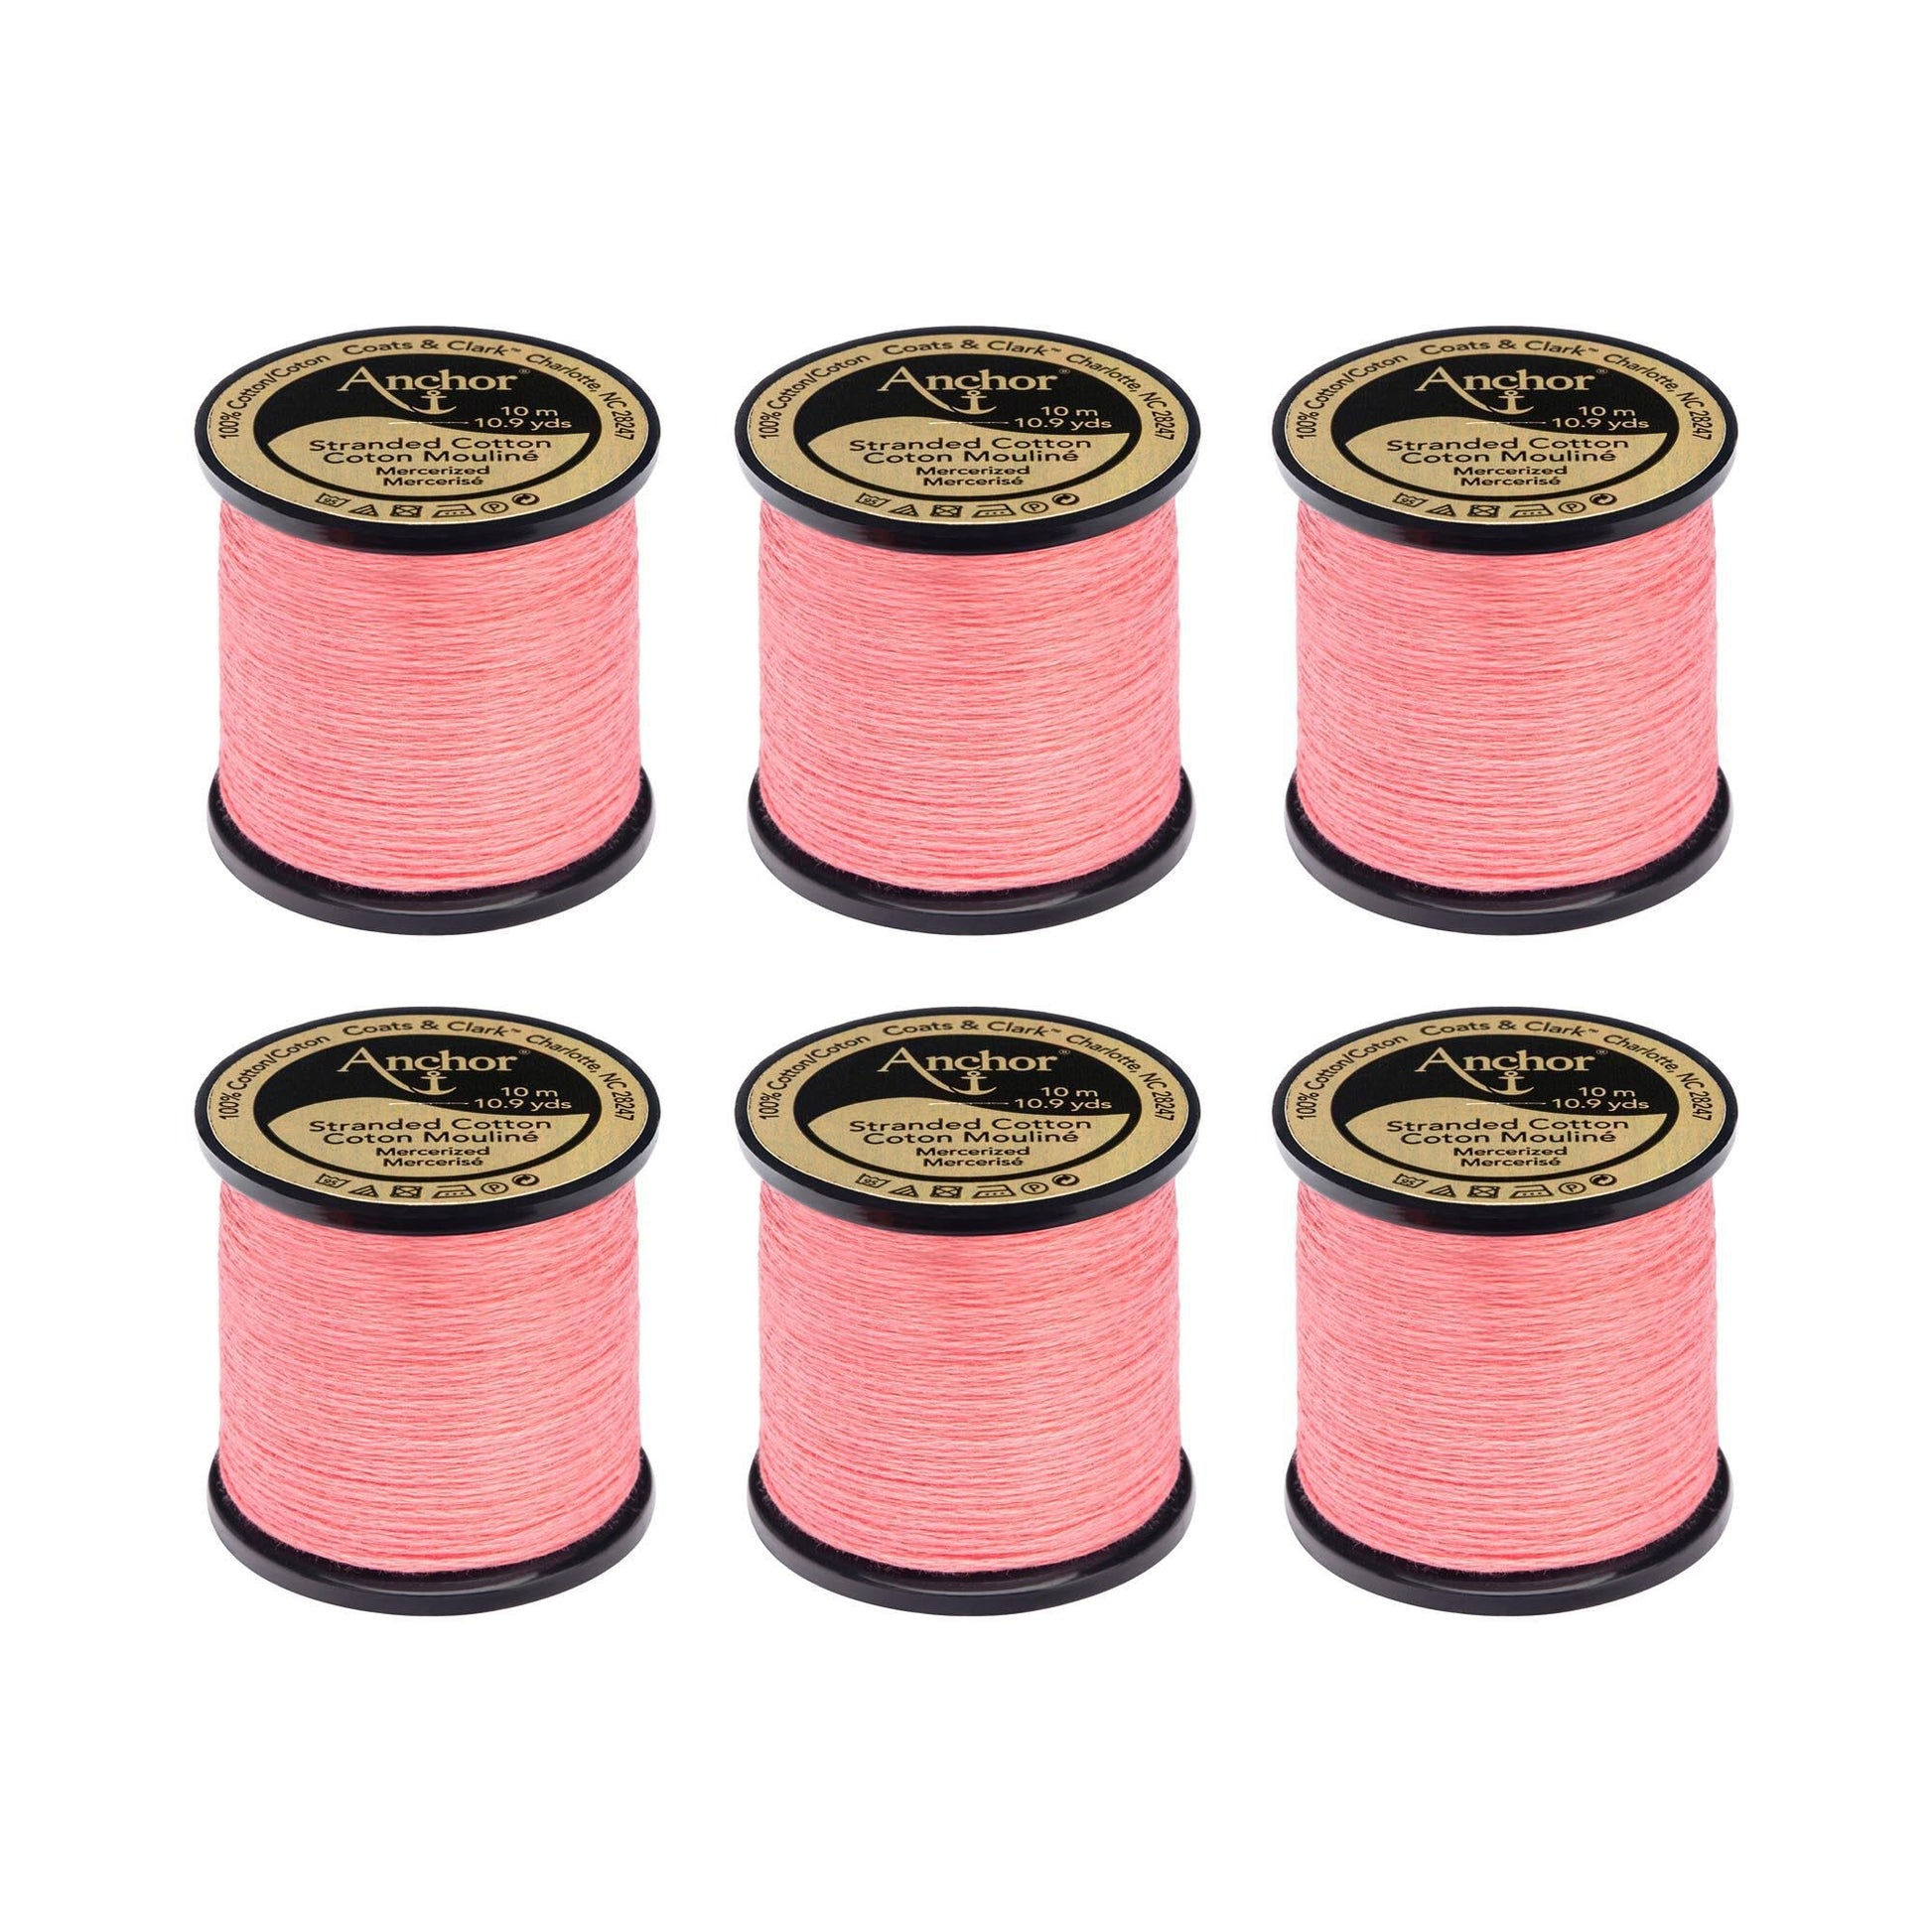 Anchor Spooled Floss 10 Meters (6 Pack) 0031 Blush Light